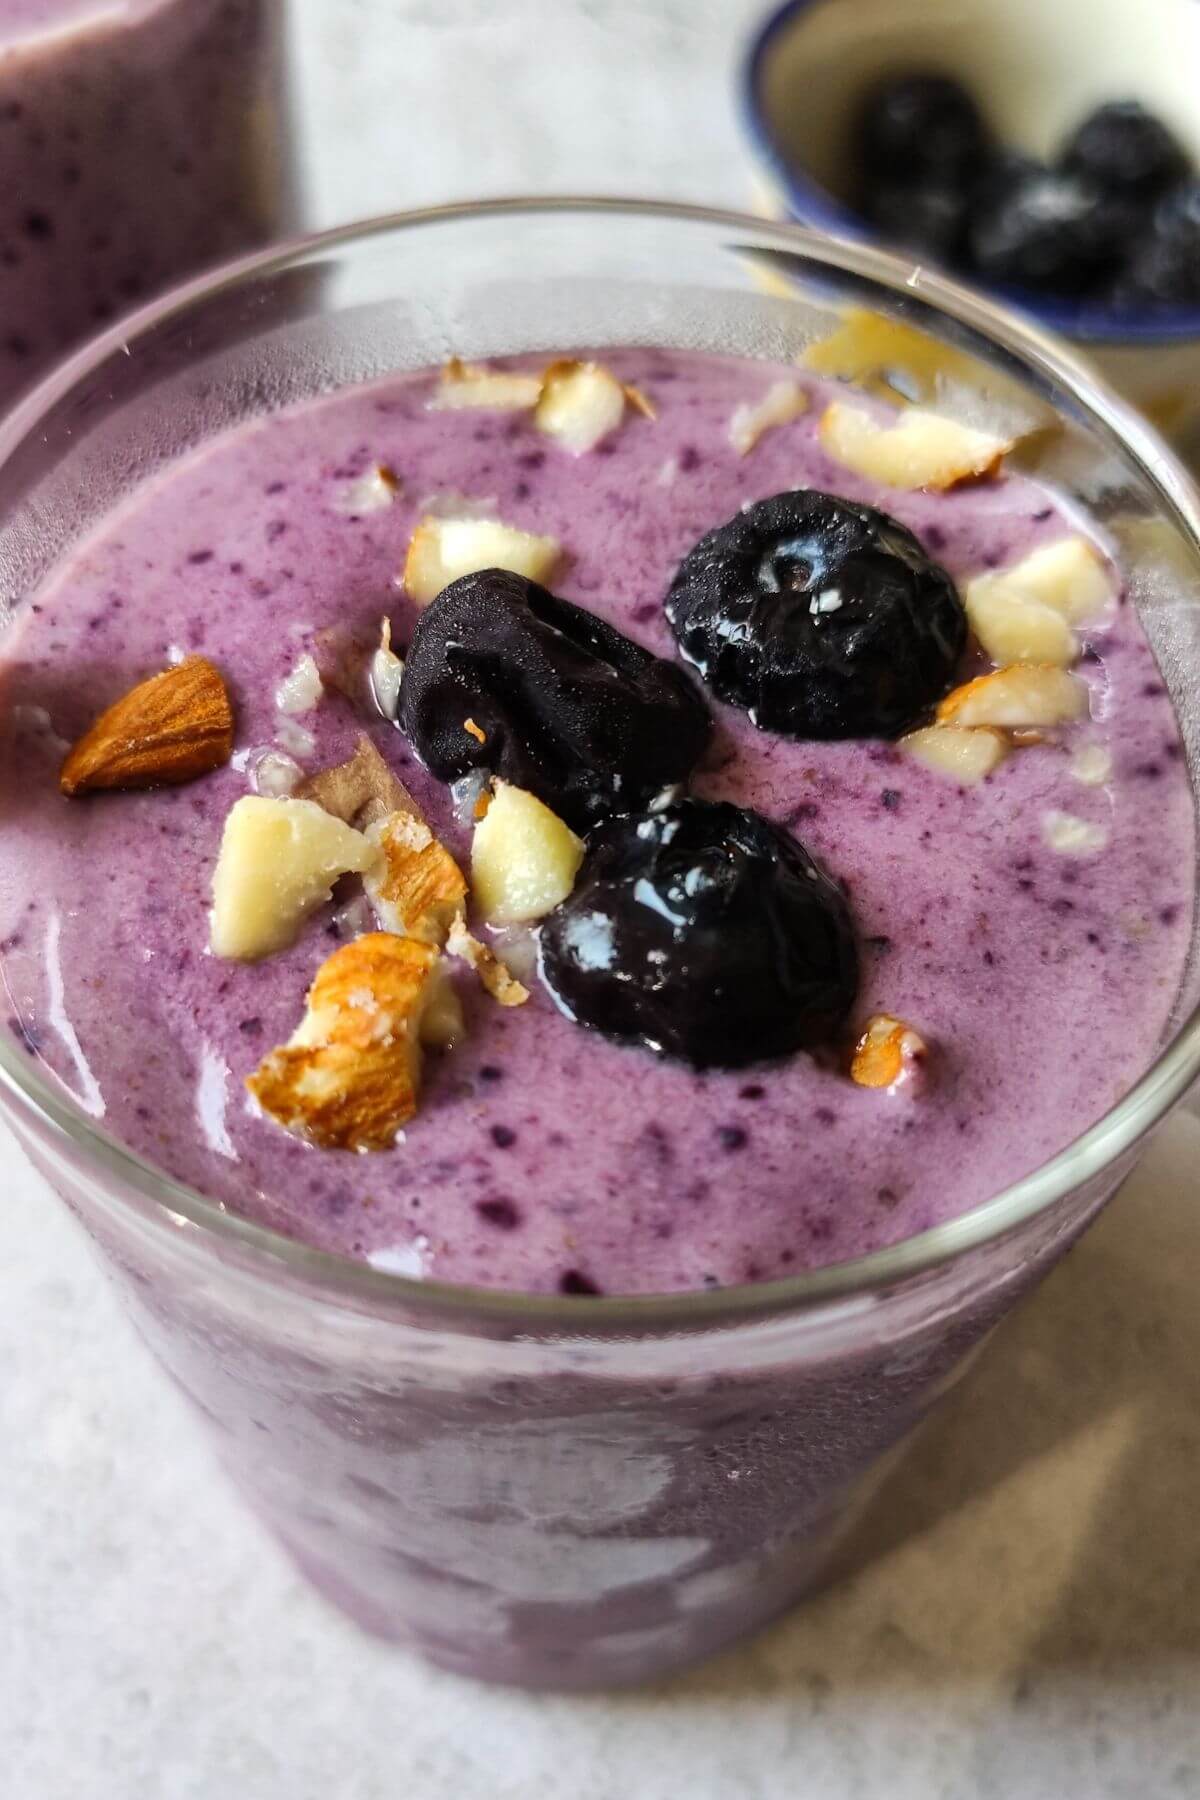 A glass of blueberry smoothie garnished with blueberries and nuts